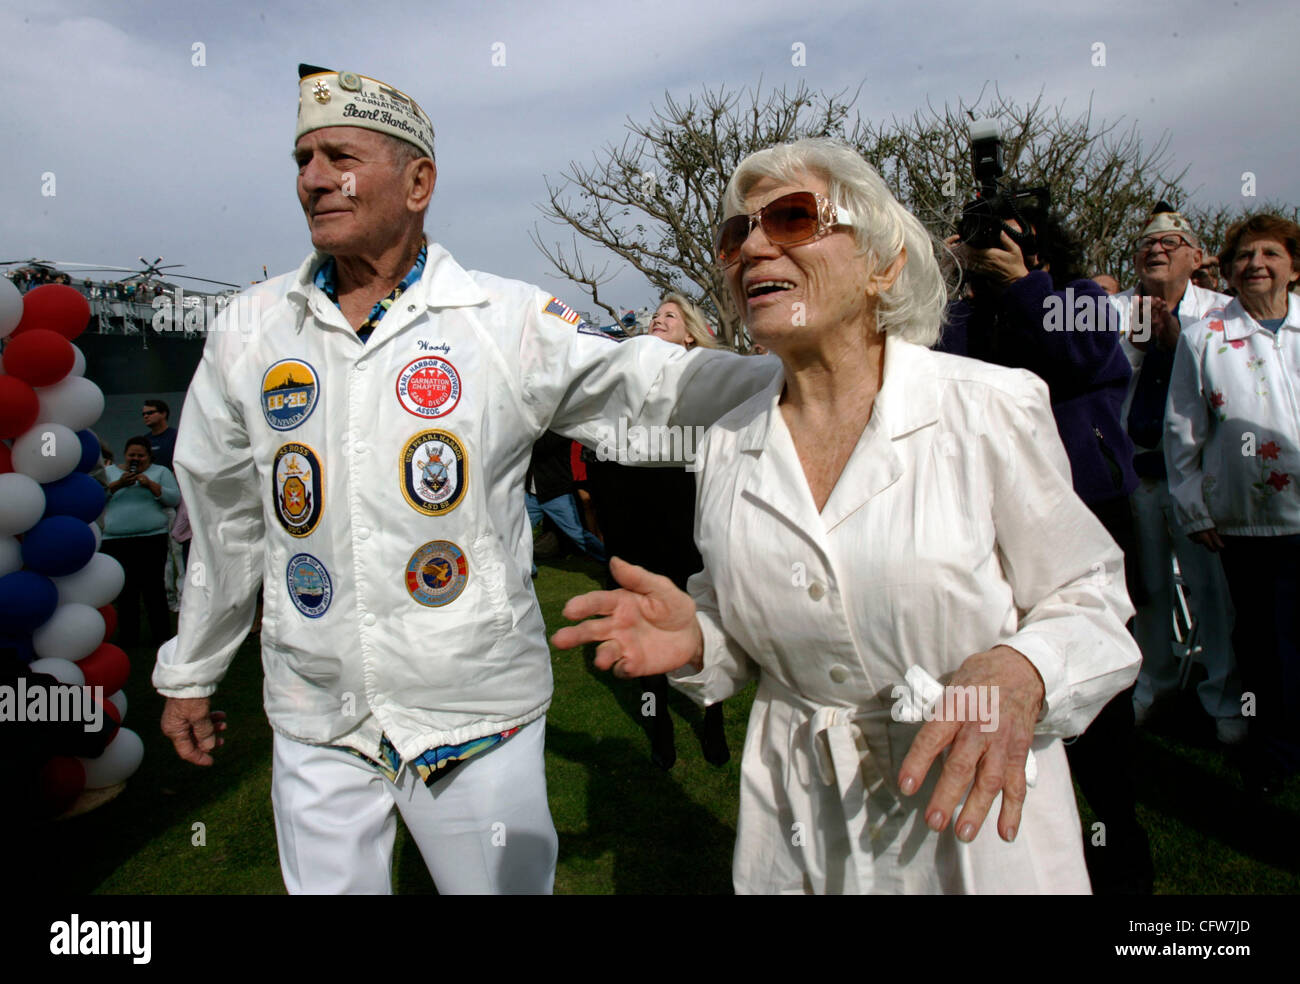 February 10, 2006 San Diego, CA  Pearl Harbor Survivors Association, Carnation Chapter in San Diego member WOODY DERBY of Allied Gardens, left, and EDITH SHAIN<cq> of Century City, California, right, watch as a 25-foot tall, 6,000-pound sculpture by J. SEWARD JOHNSON, called 'Unconditional Surrender Stock Photo